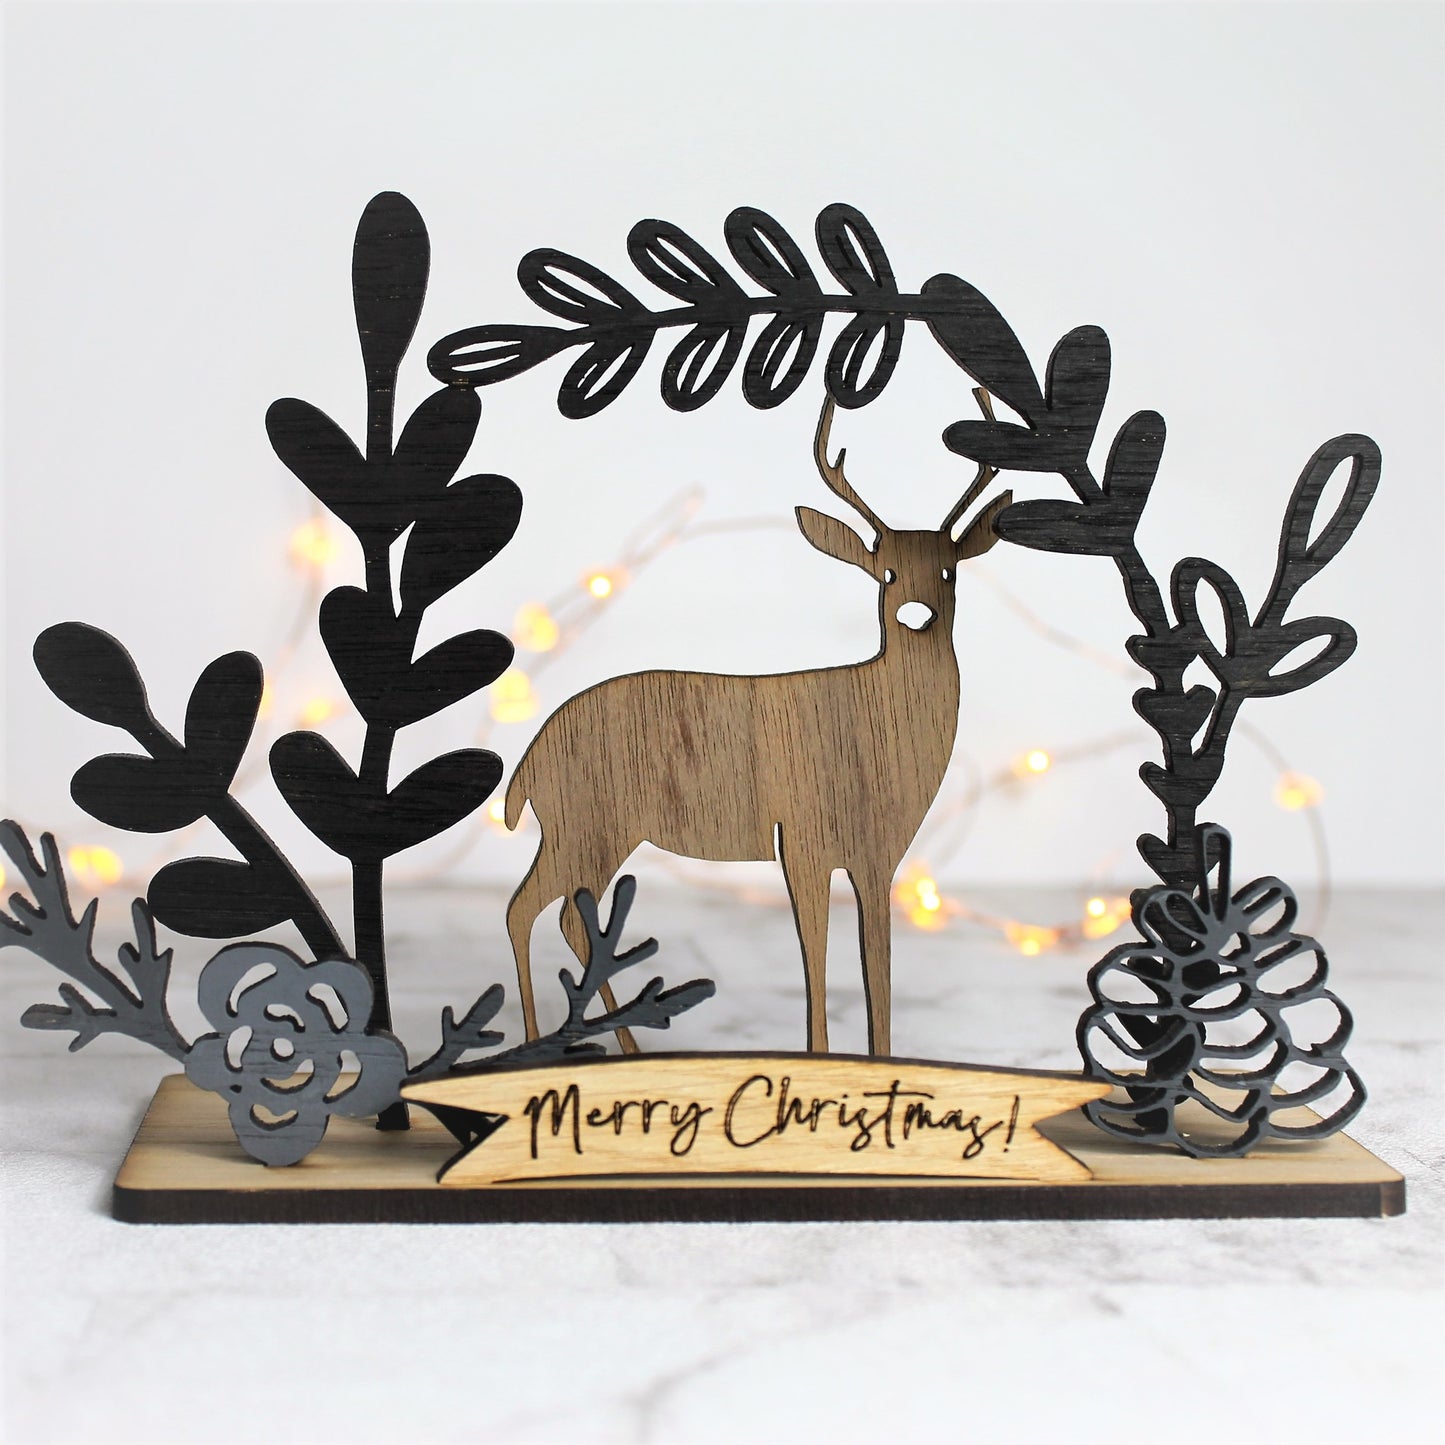 Wooden winter scene with deer and floral flourishes around the edges